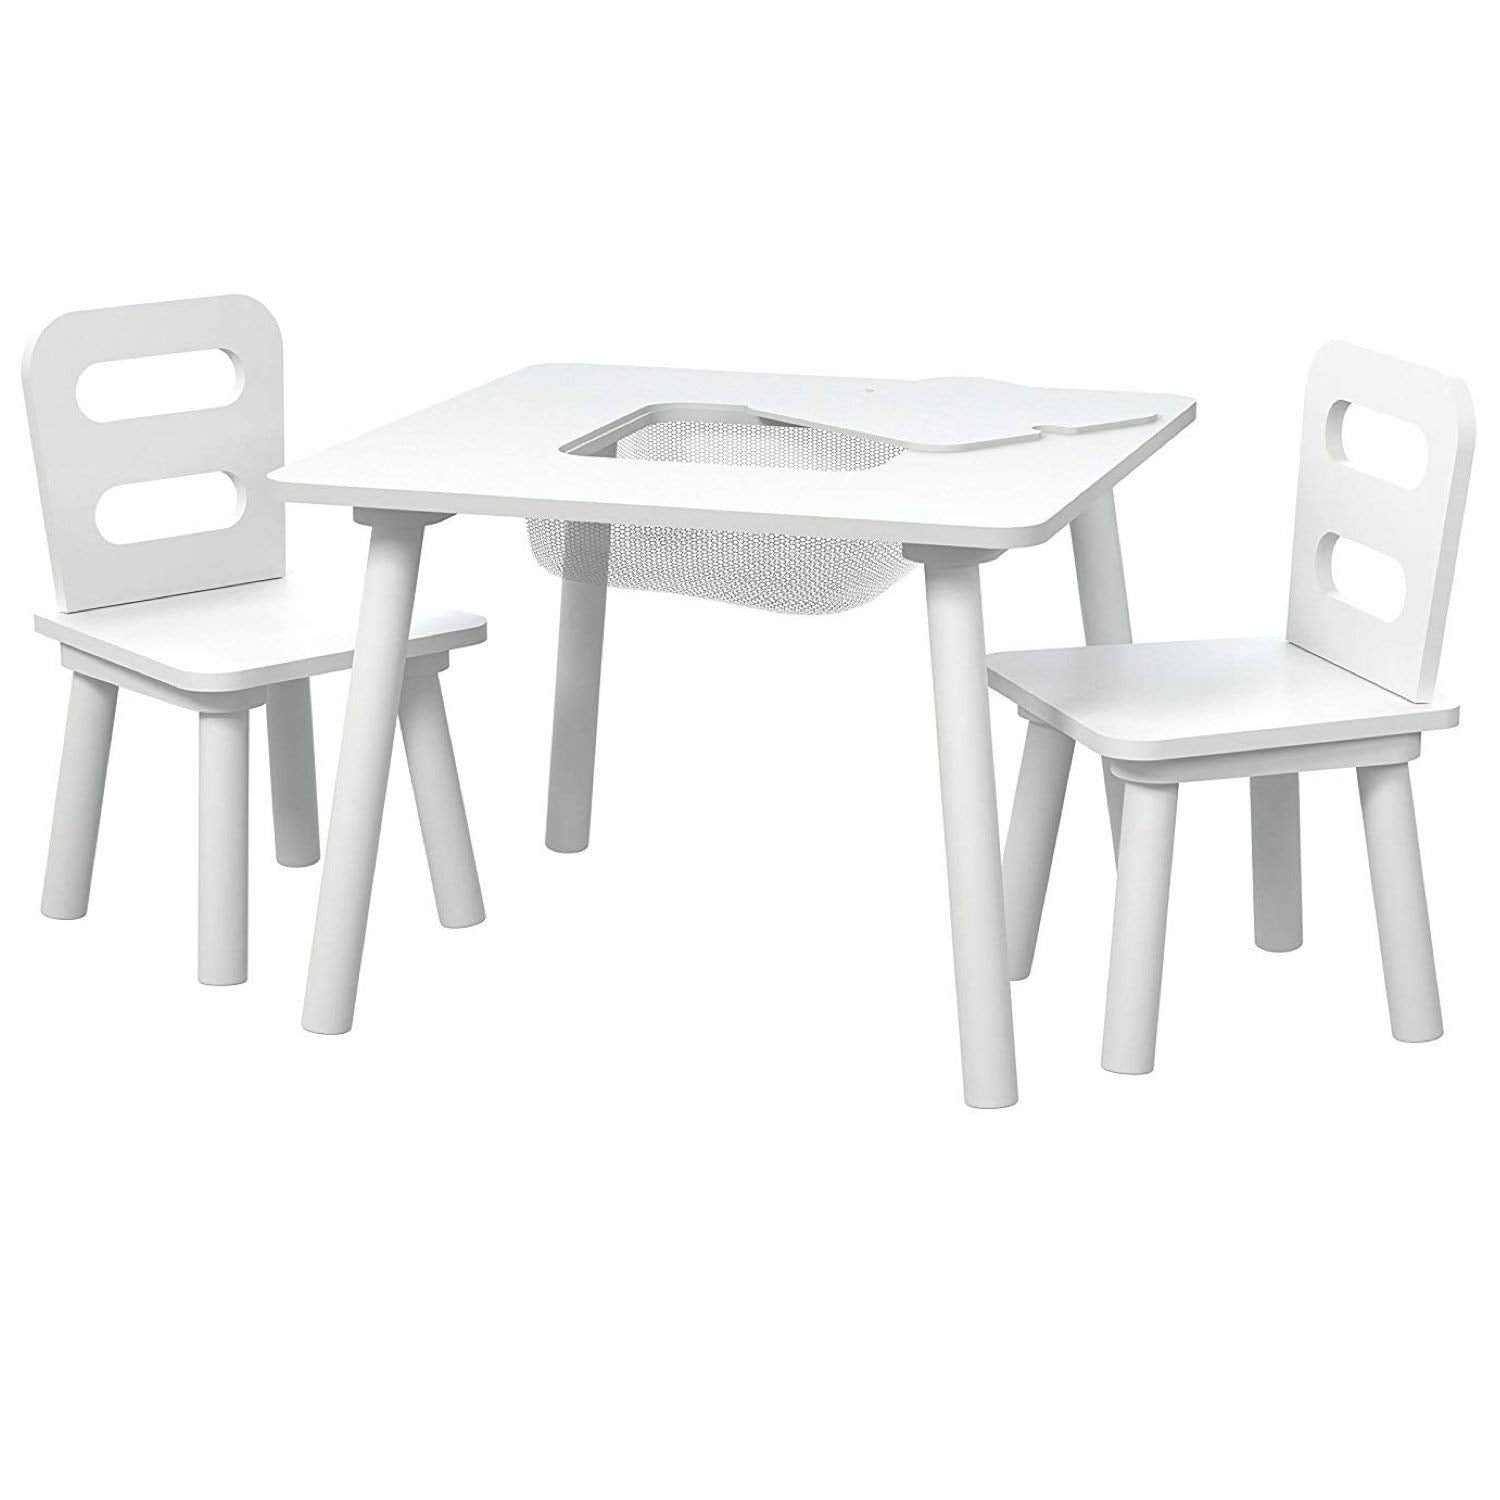 Pidoko Kids Table and Chairs Set with 